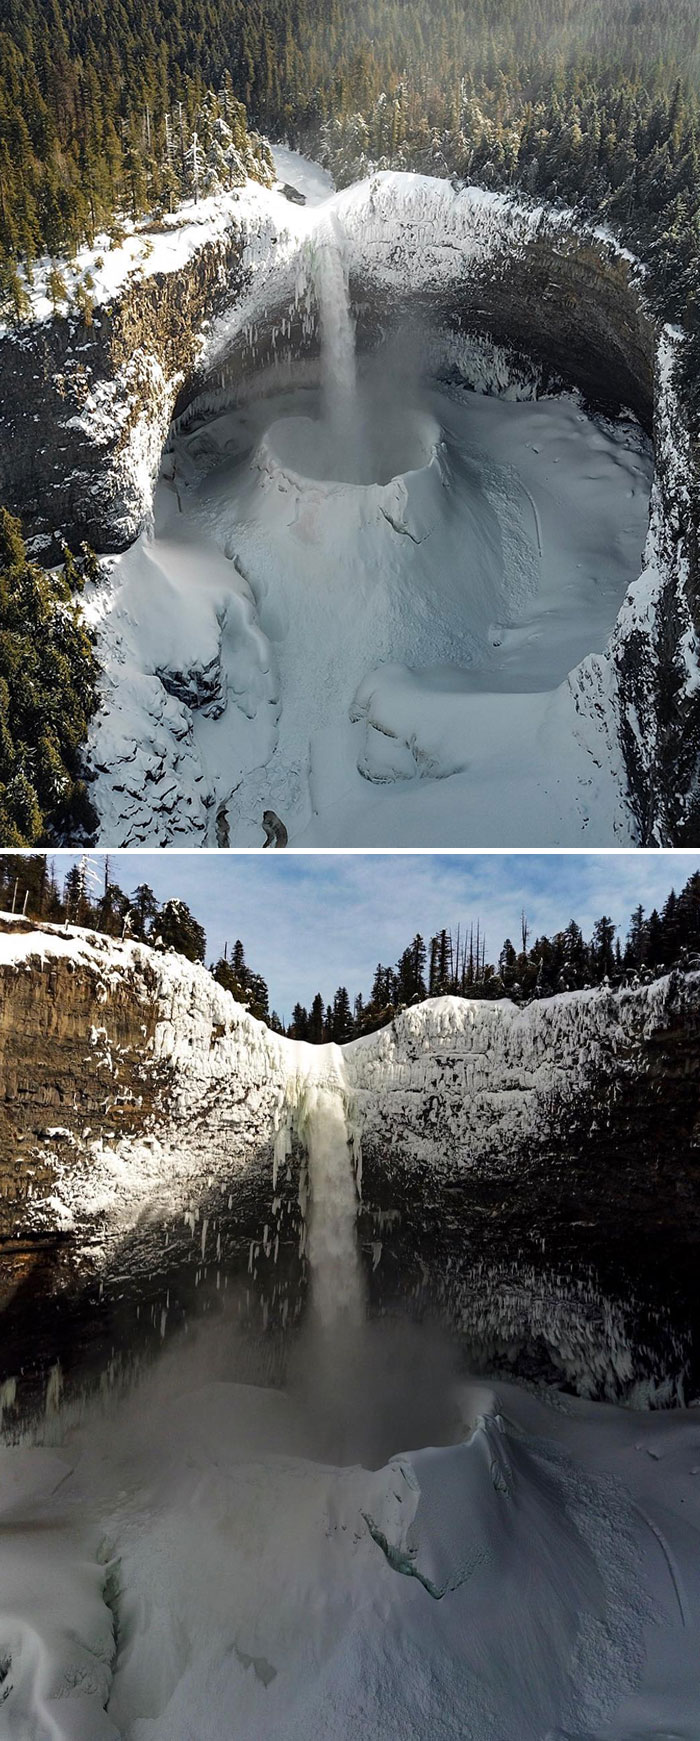 Freezing Temperatures Create The Perfect Environment For Free-Falling Water To Form A Massive "Ice Crater" At The Bottom Of The Falls